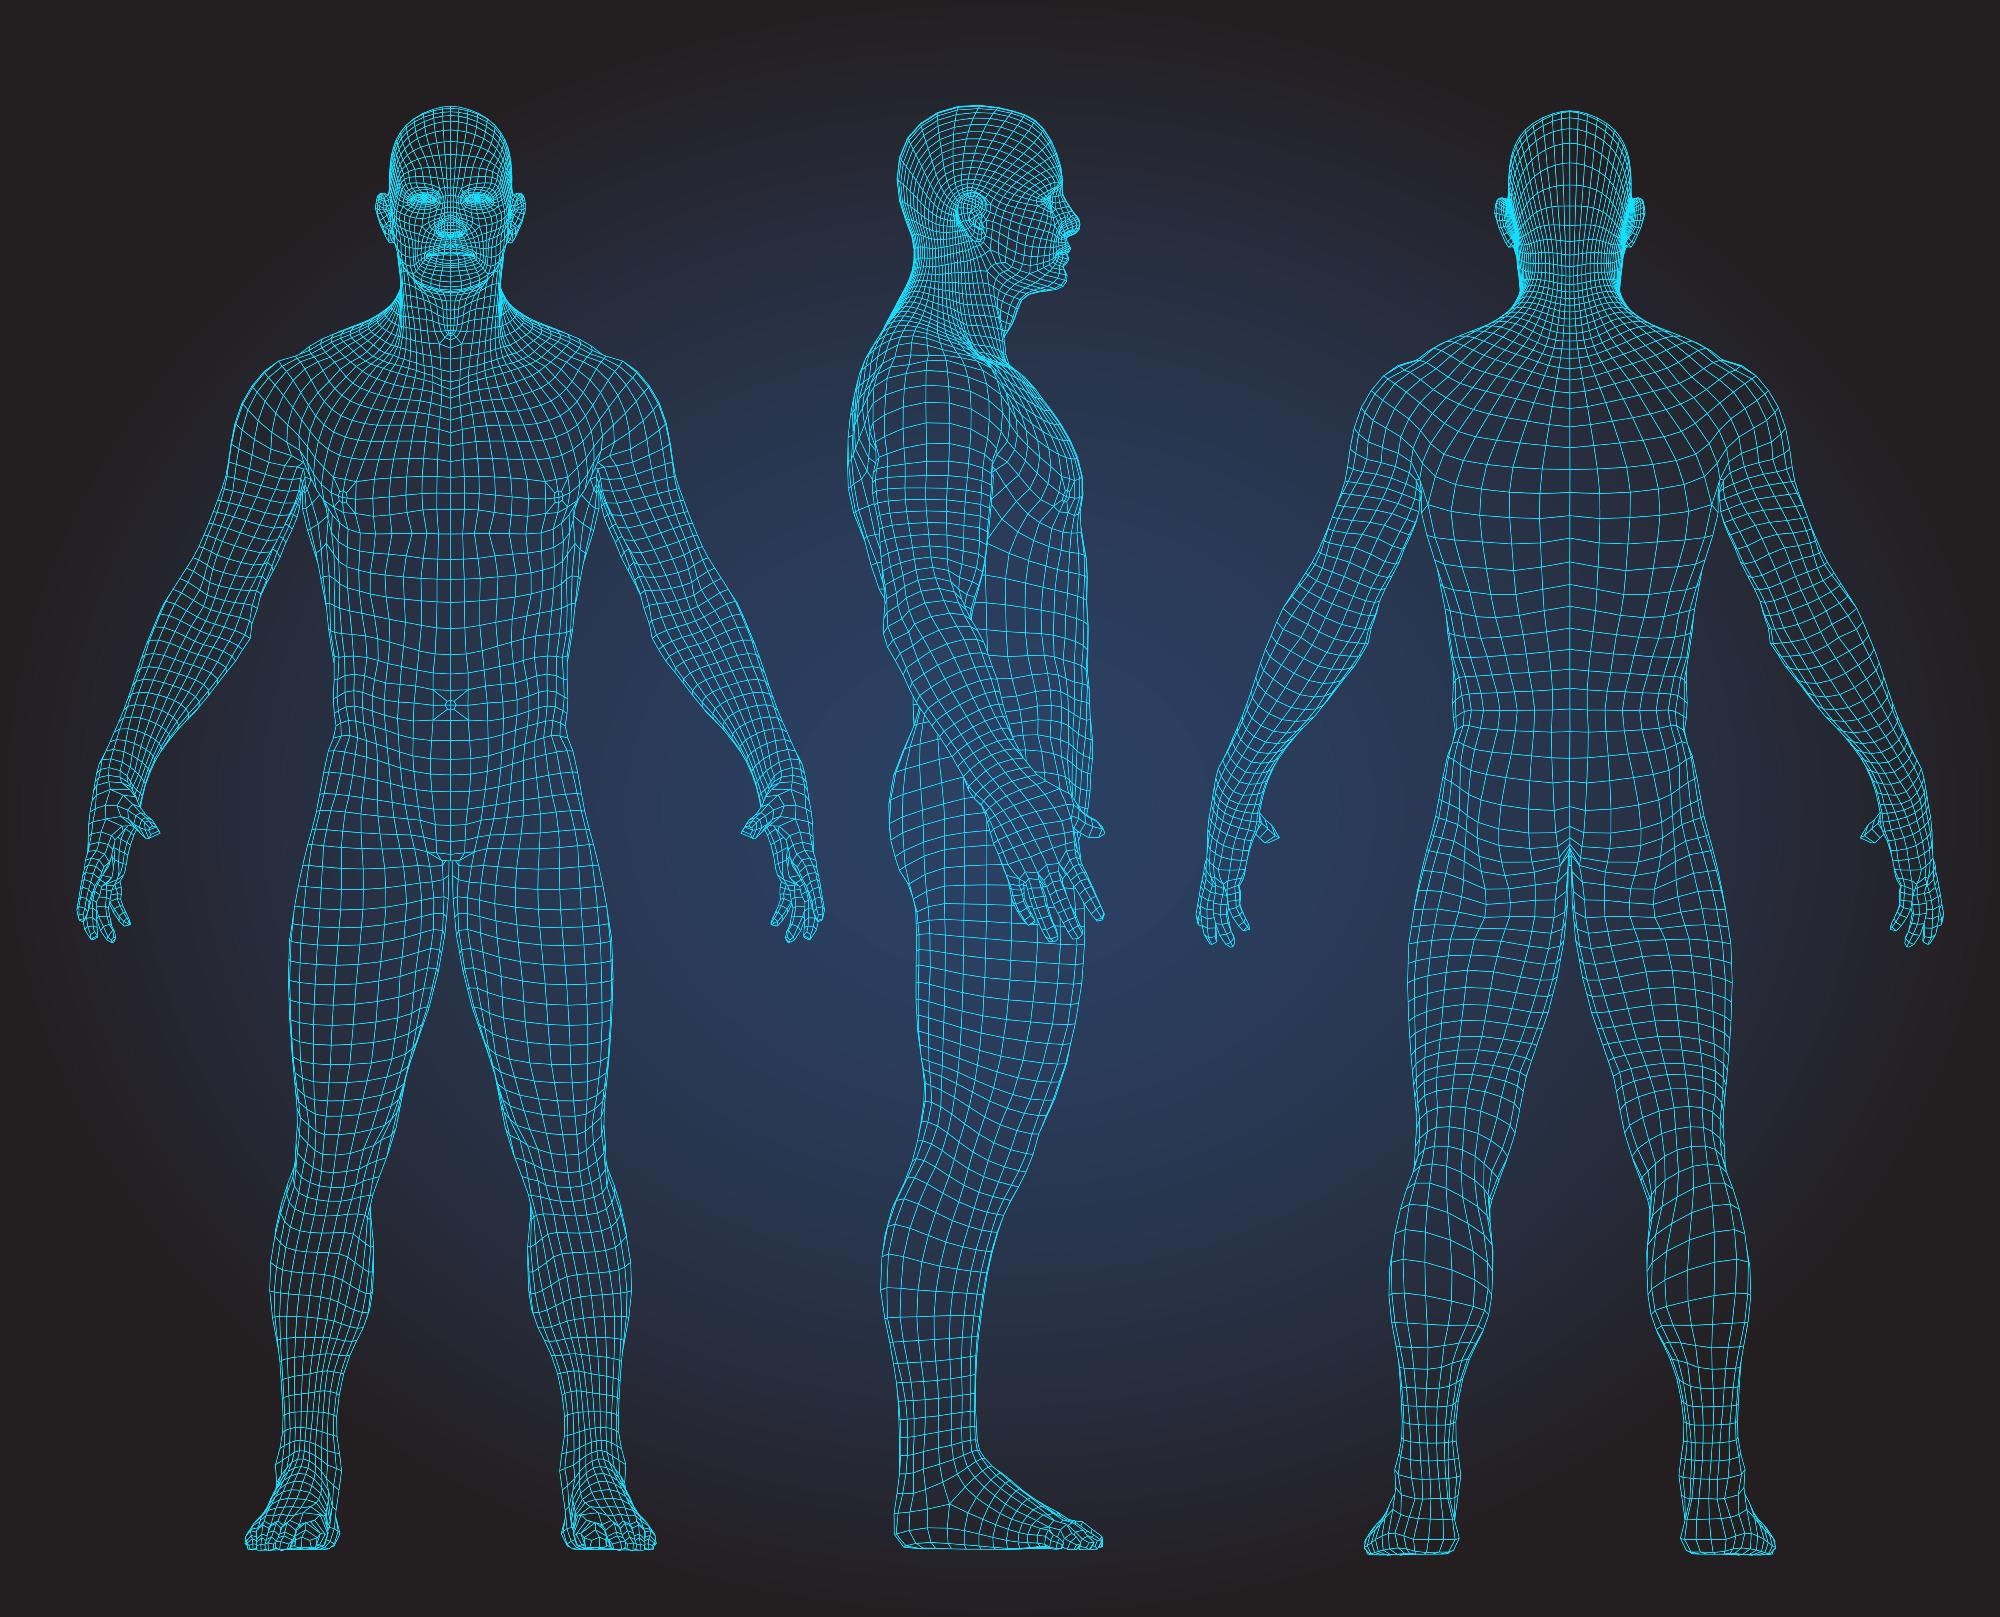 Sensors Can Better Read Human Poses in 3D